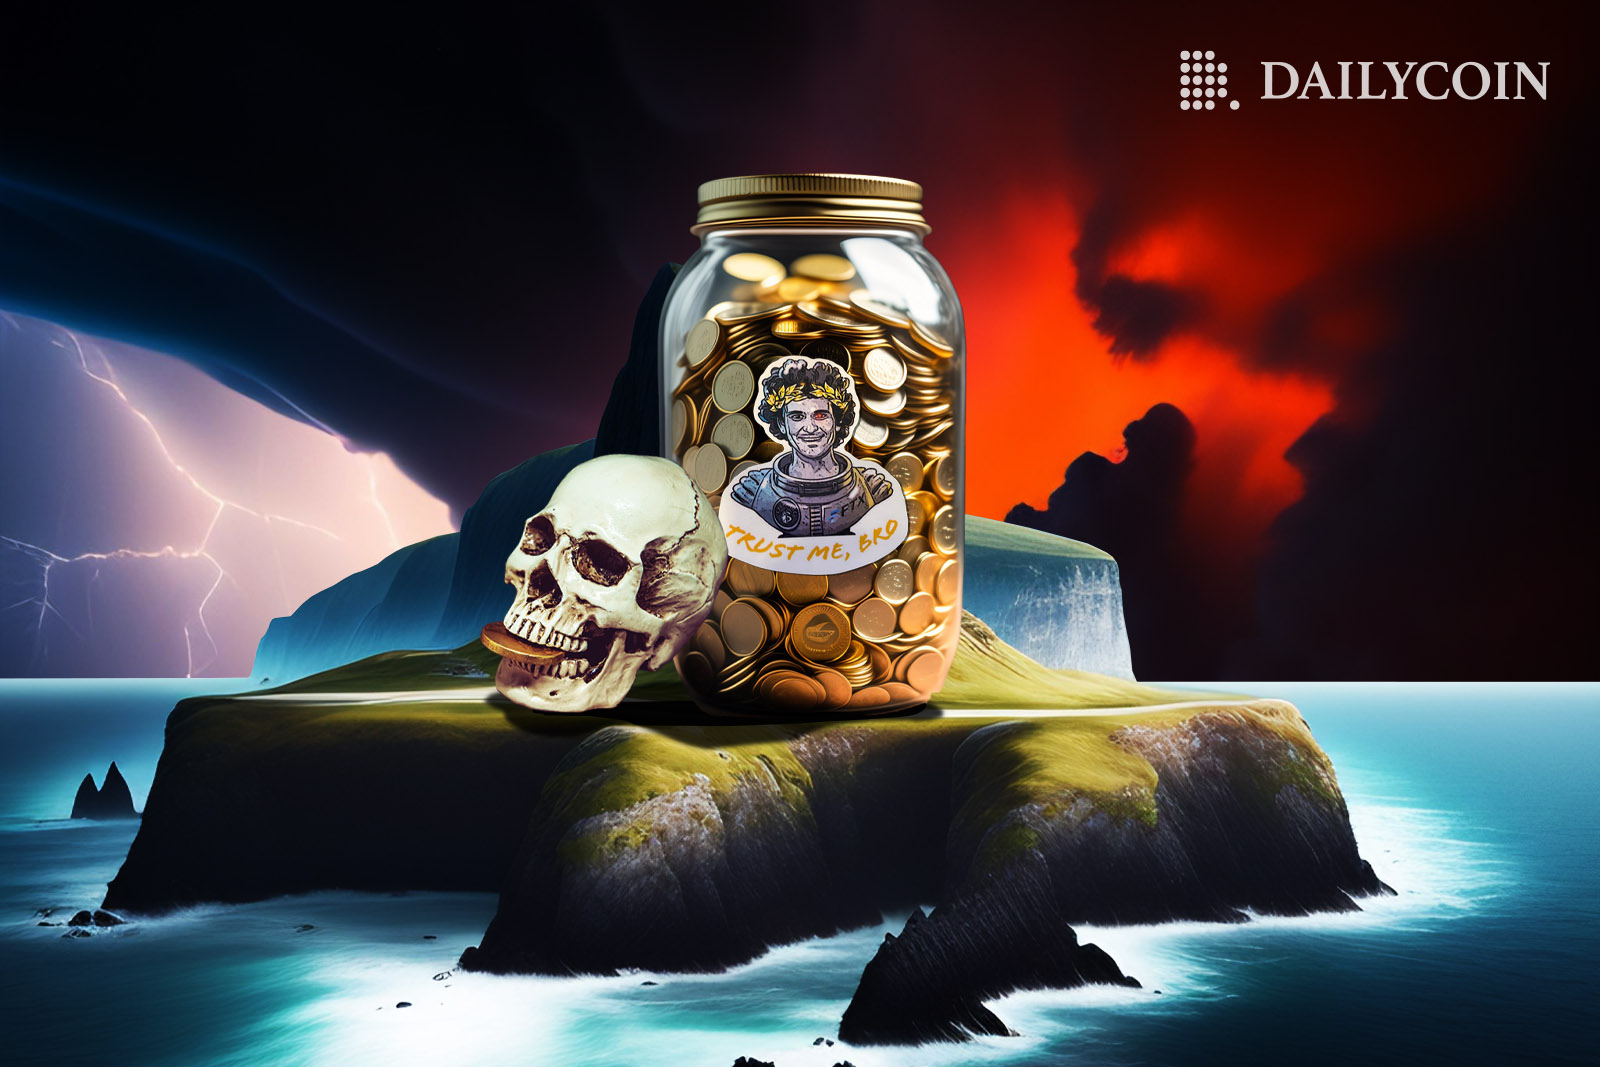 Jar full of crypto coins with SBF's image on it saying "trust me bro" next to skull on island.